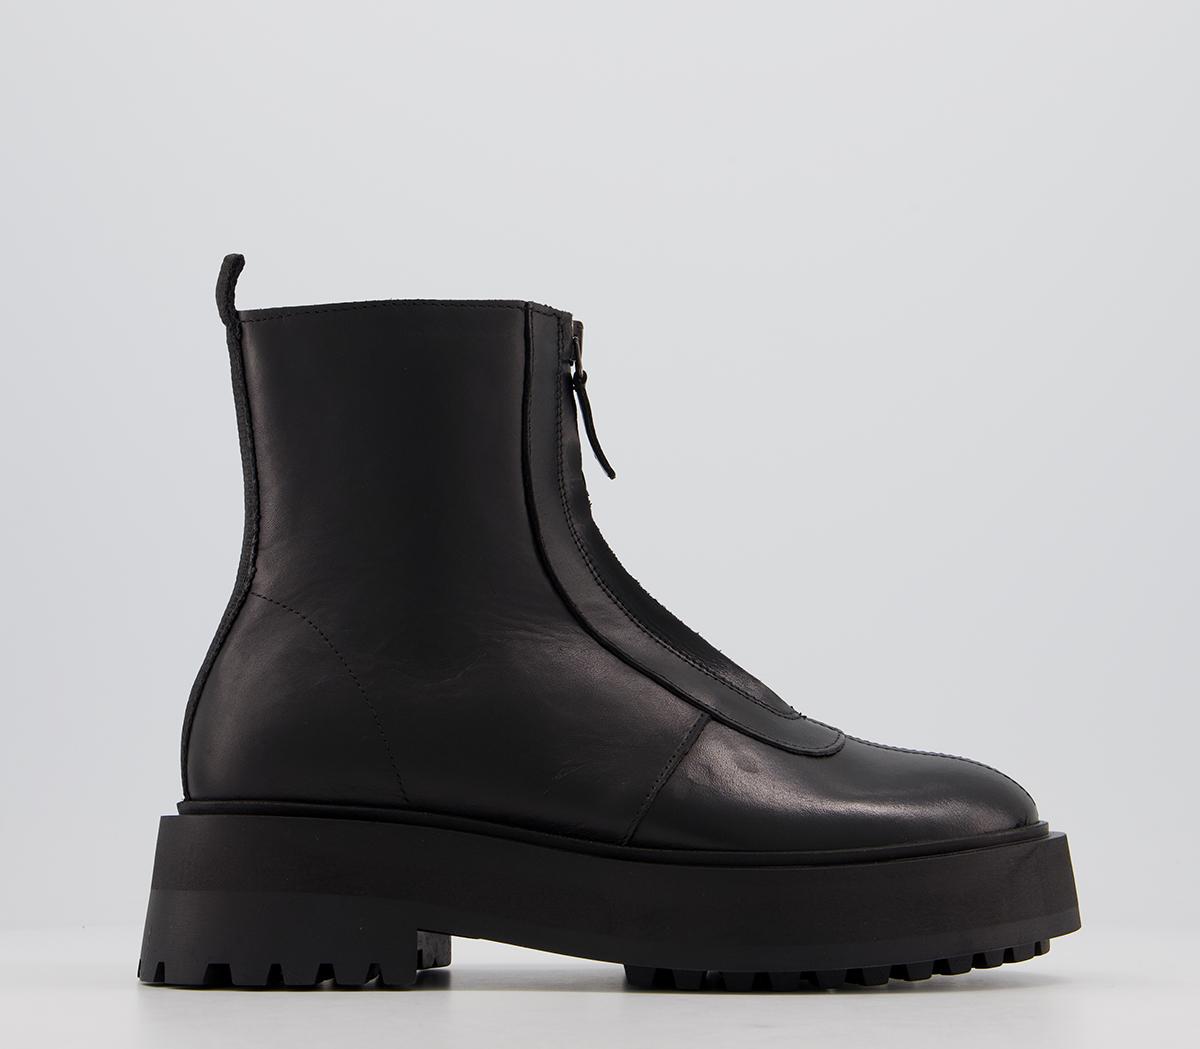 OFFICEAccomplish Front Zip Ankle BootsBlack Leather